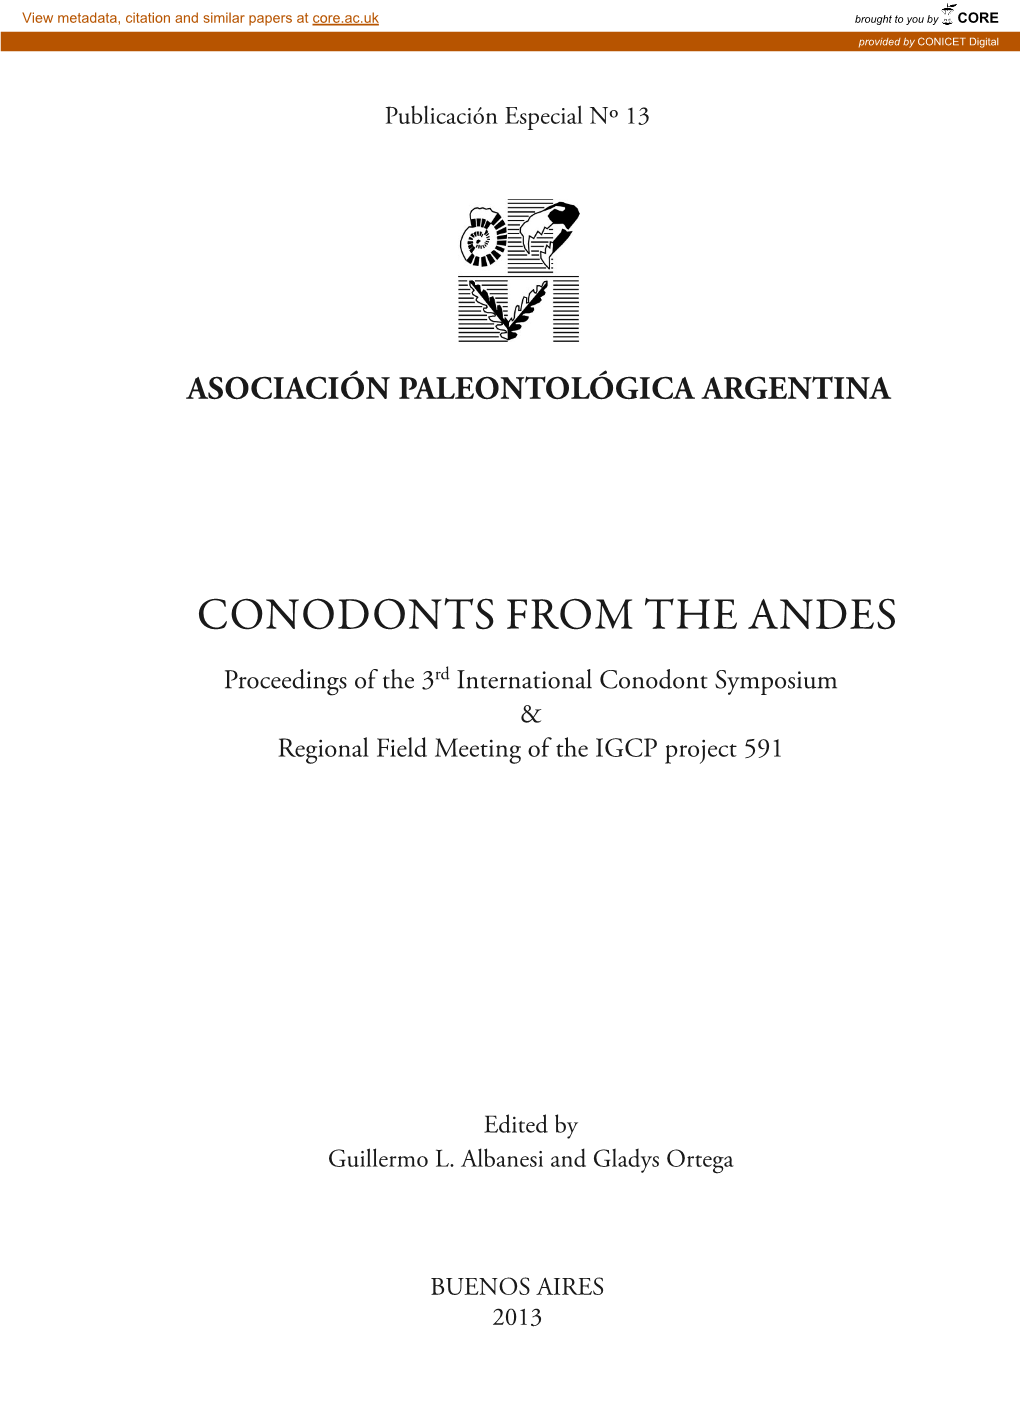 Conodonts from the Andes